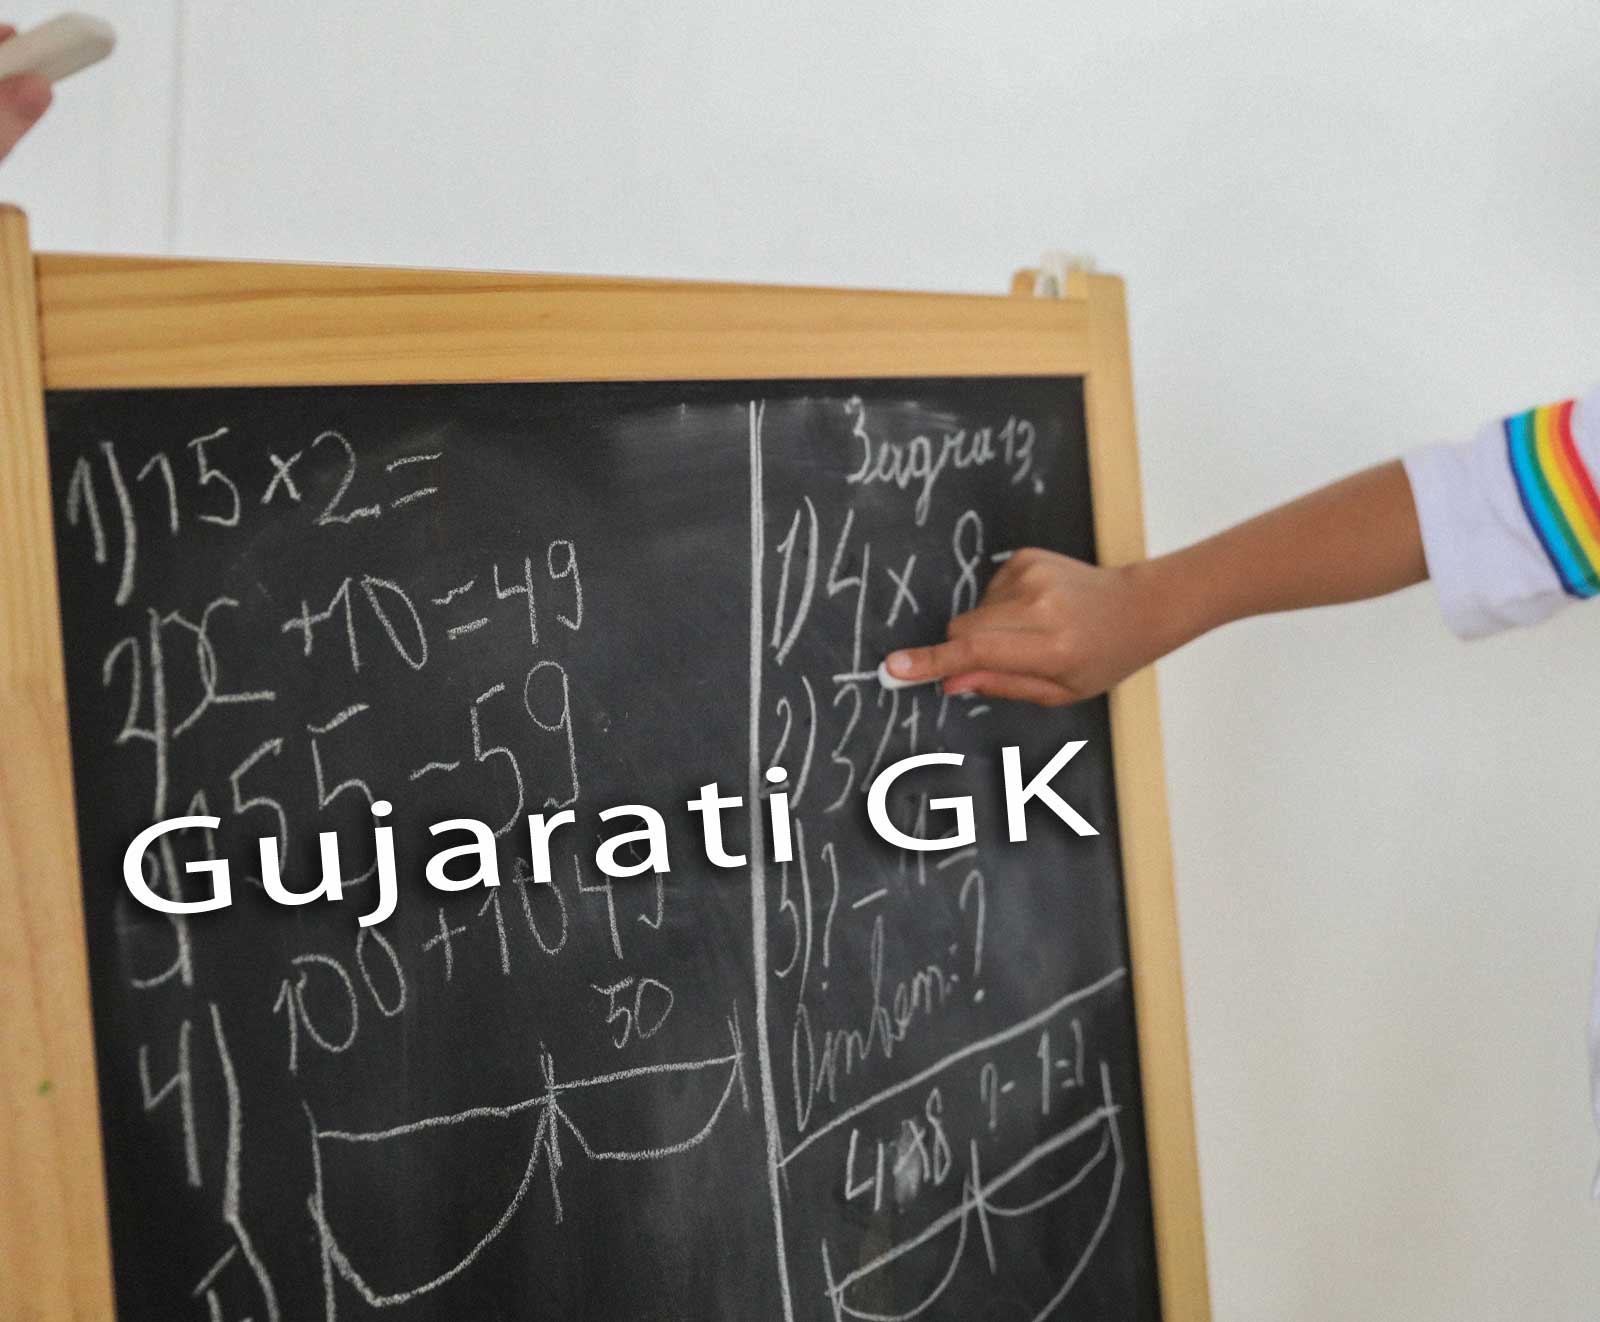 Gujarati GK Sample Questions and Answers